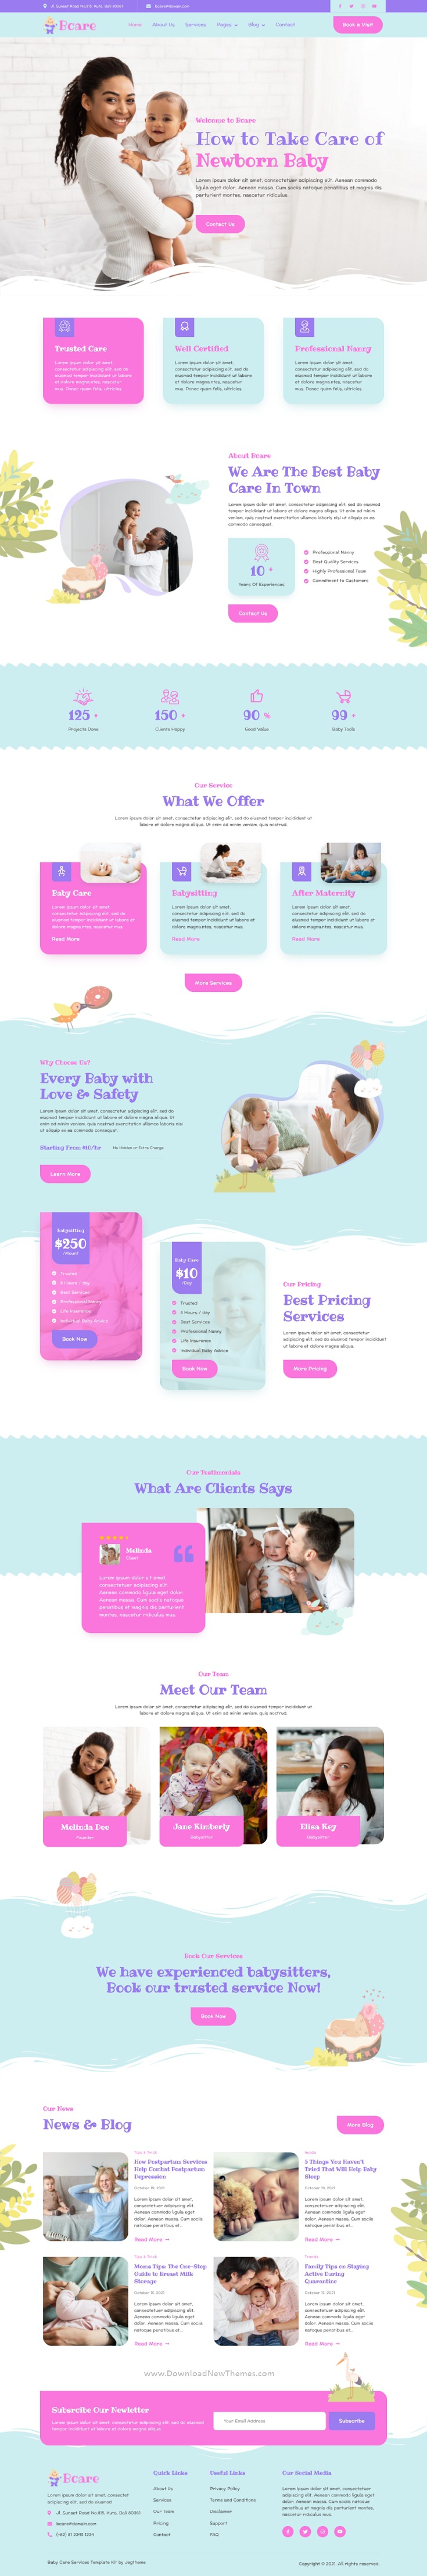 Bcare – Baby Care Services Elementor Template Kit Review